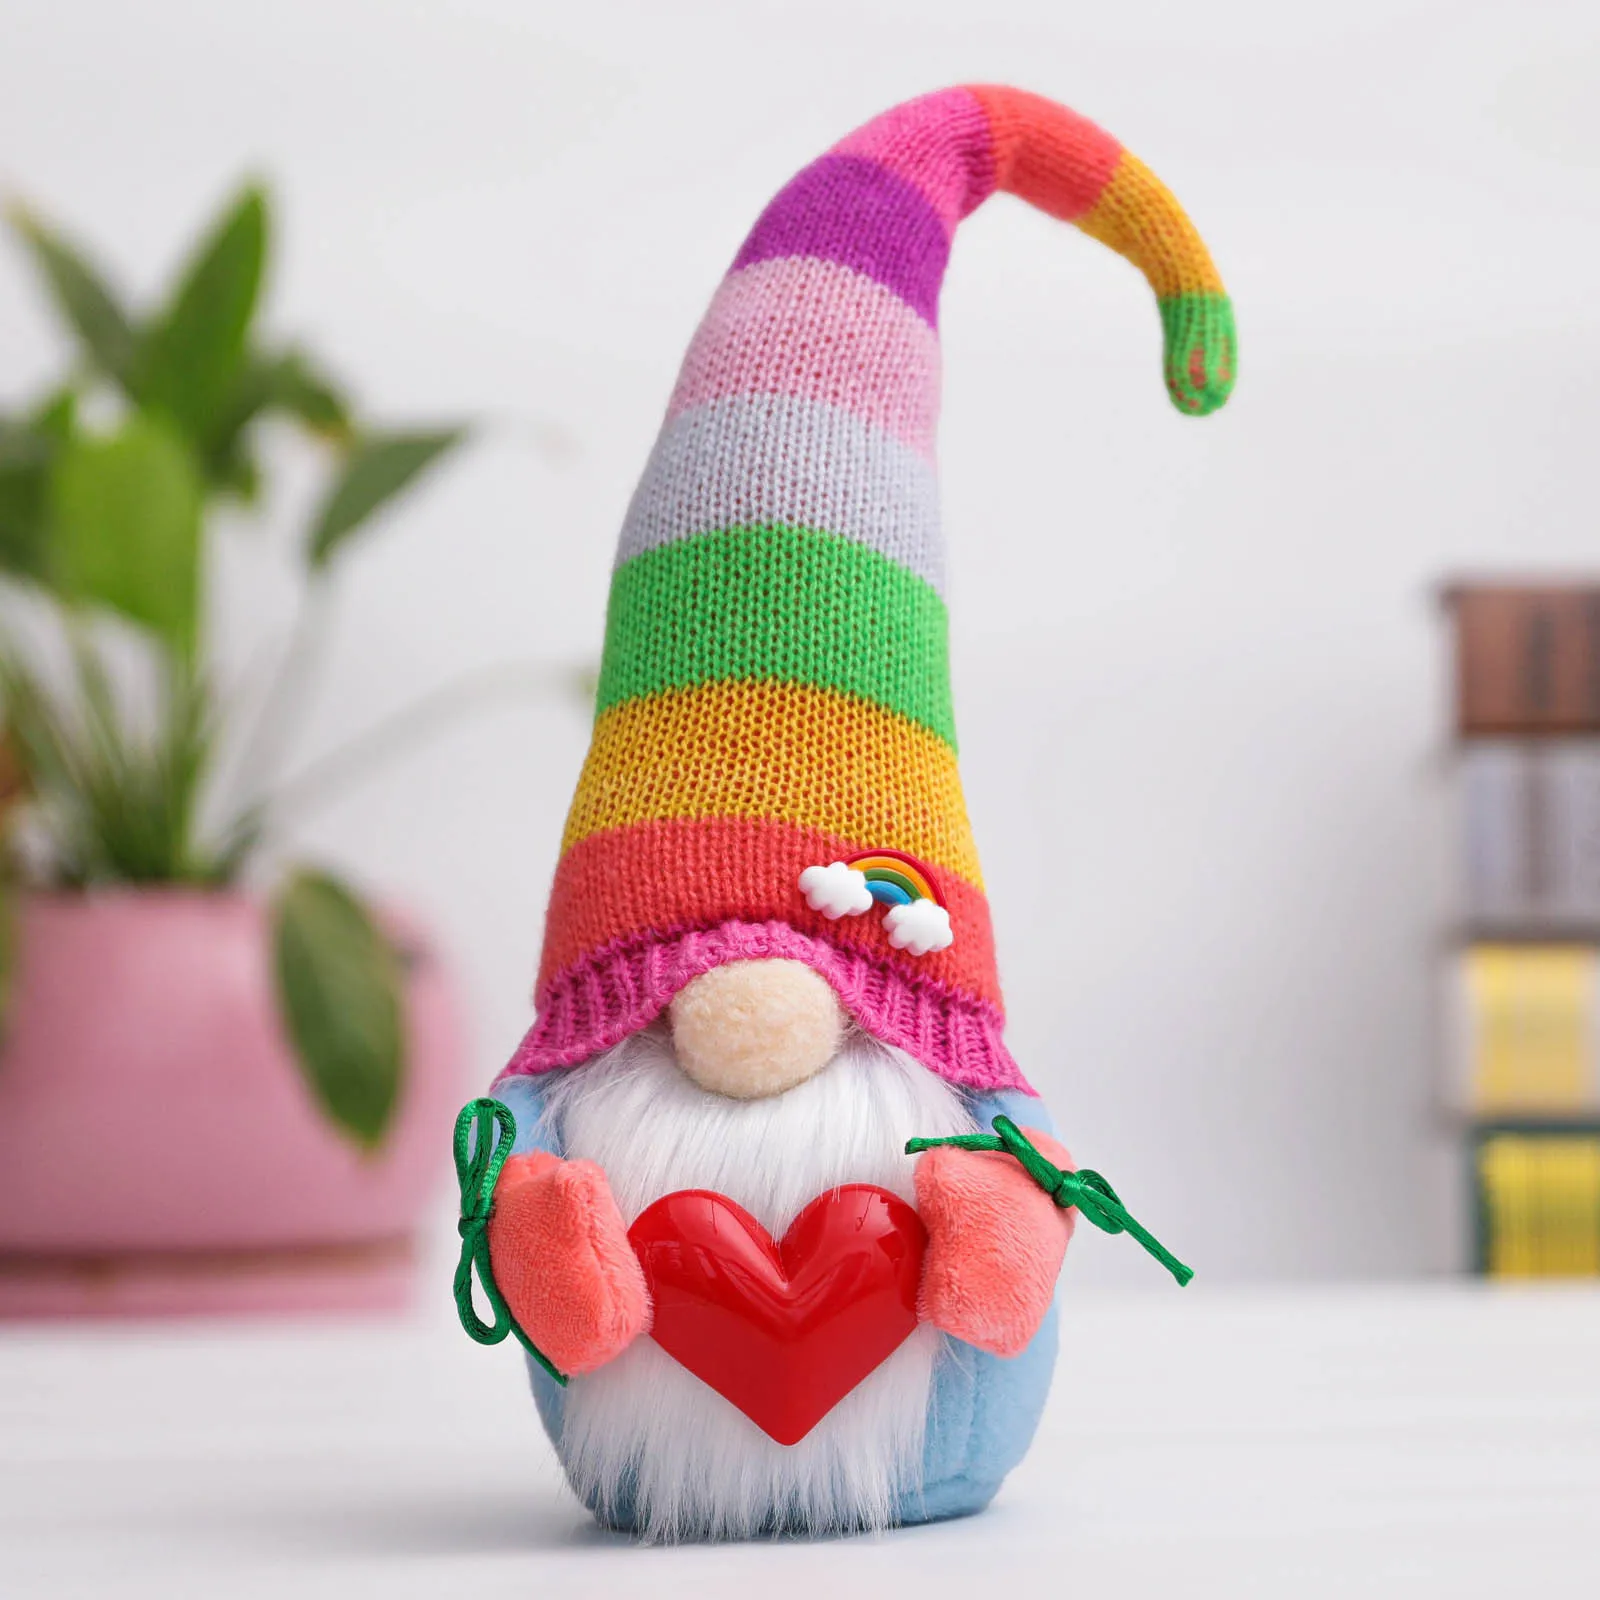 1pc Christmas Rainbow Gnome Faceless Plush Doll Scandinavian Tomte Nisse Pride Nordic Home Decor Colorful Dwarf Doll for Kids